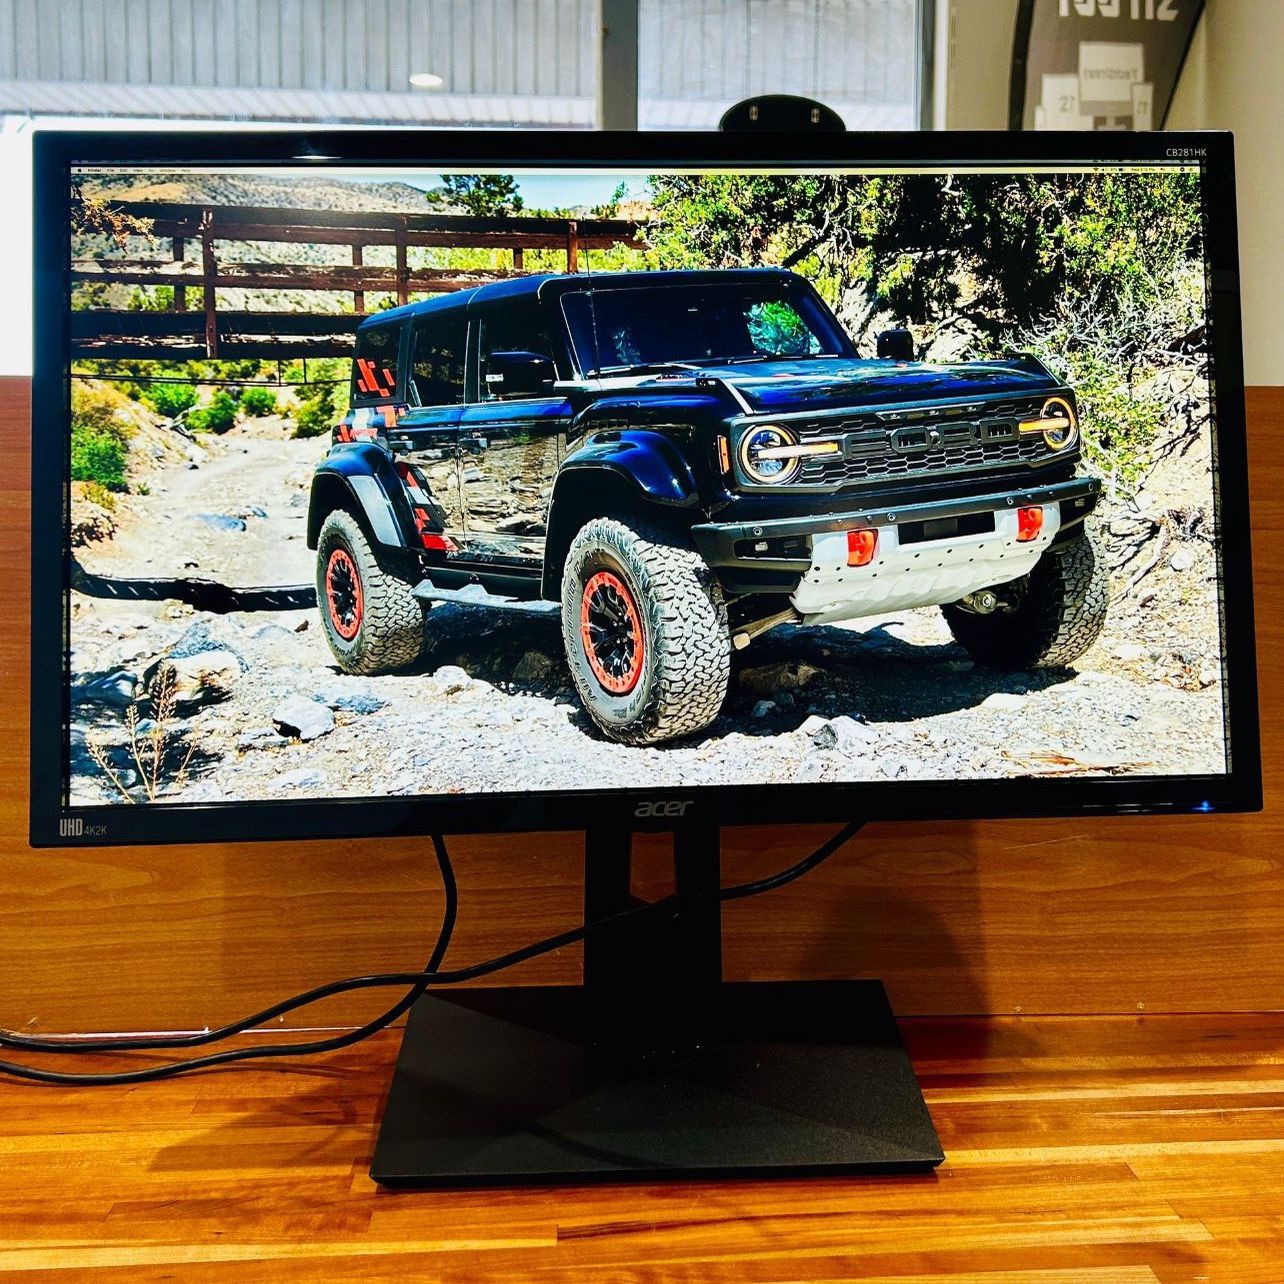 Acer 28” 4K LED MONITOR  3840 x 2160P Resolution//Speakers//Rotate -Like New